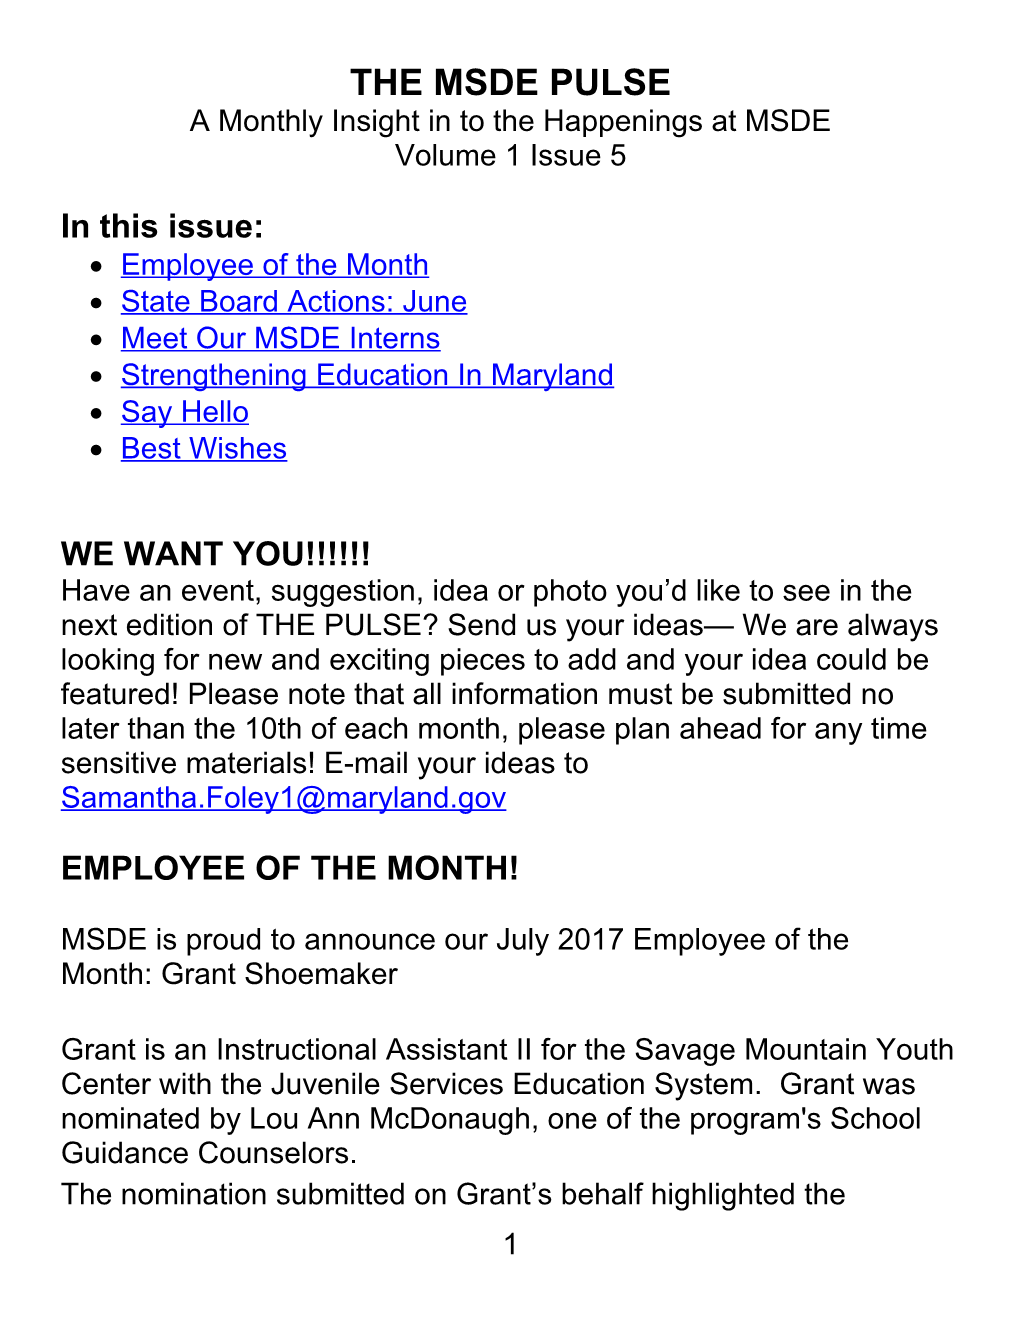 A Monthly Insight in to the Happenings at MSDE